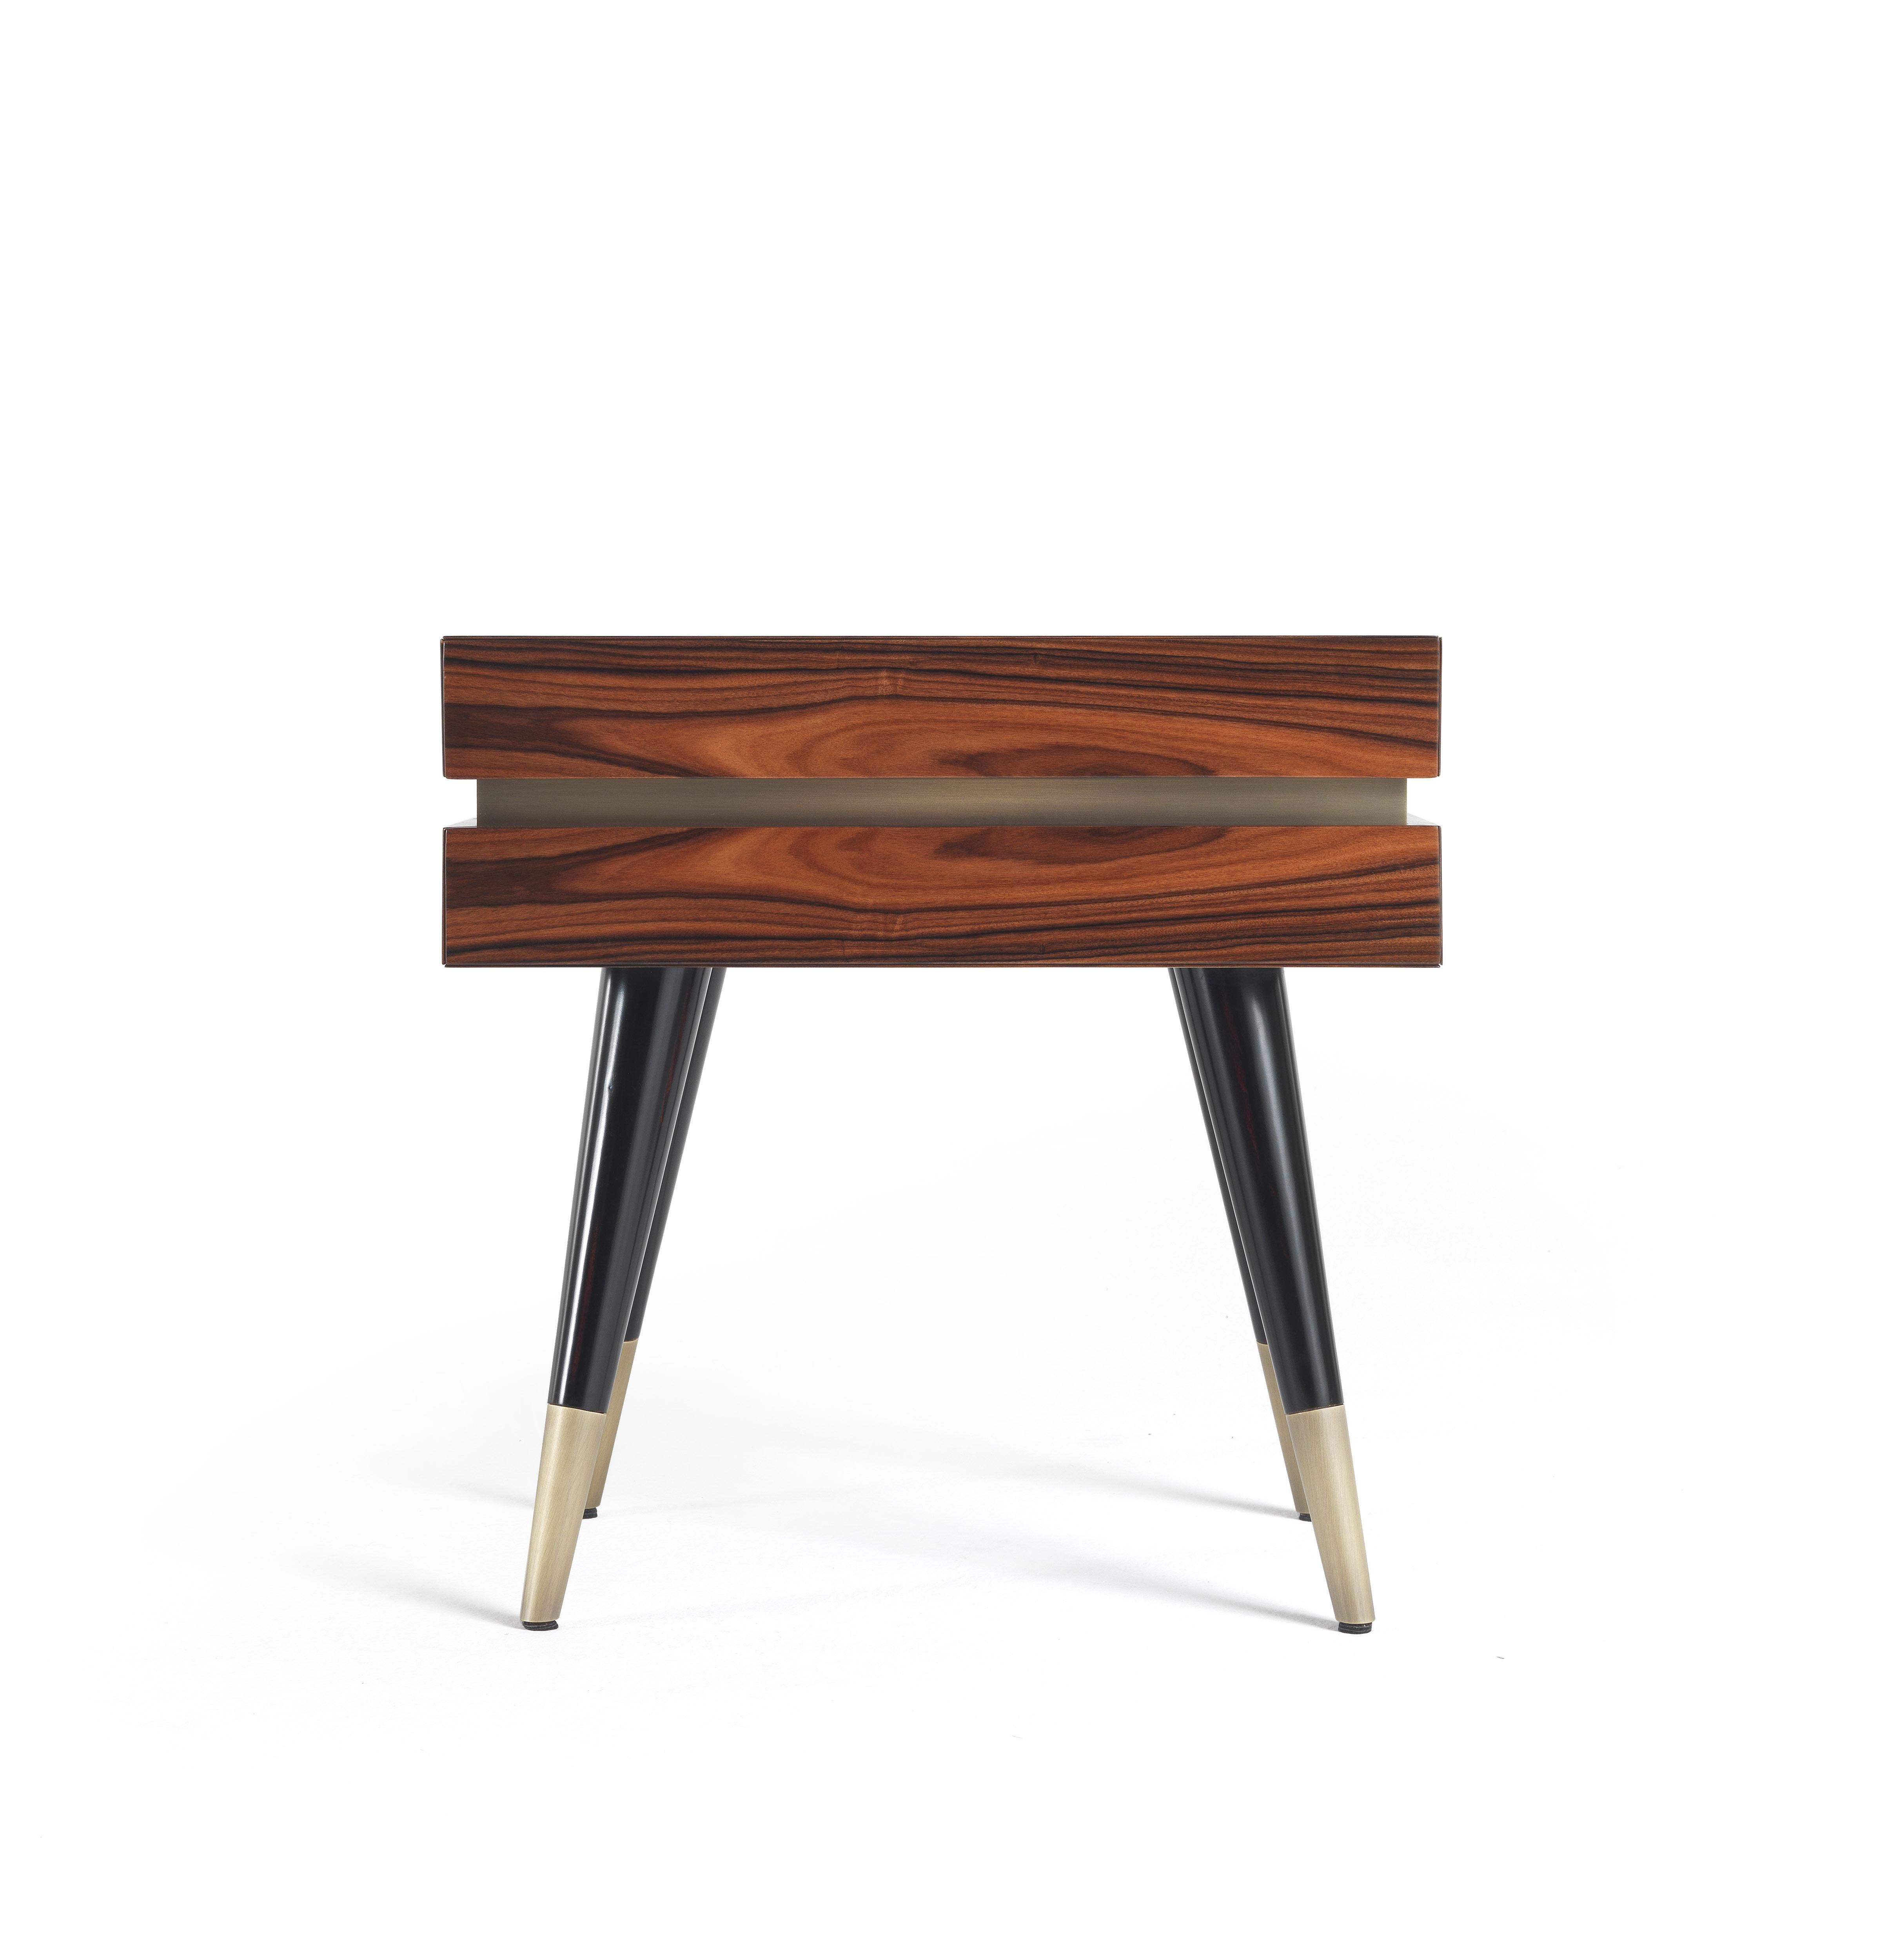 Assembled at 45°, with a rosewood sheet that rotates around the entire cabinet giving a sense of continuity, the Sean night table features the presence of sloping legs with brass tips and handleless drawers with bronzed brass band. A combination of